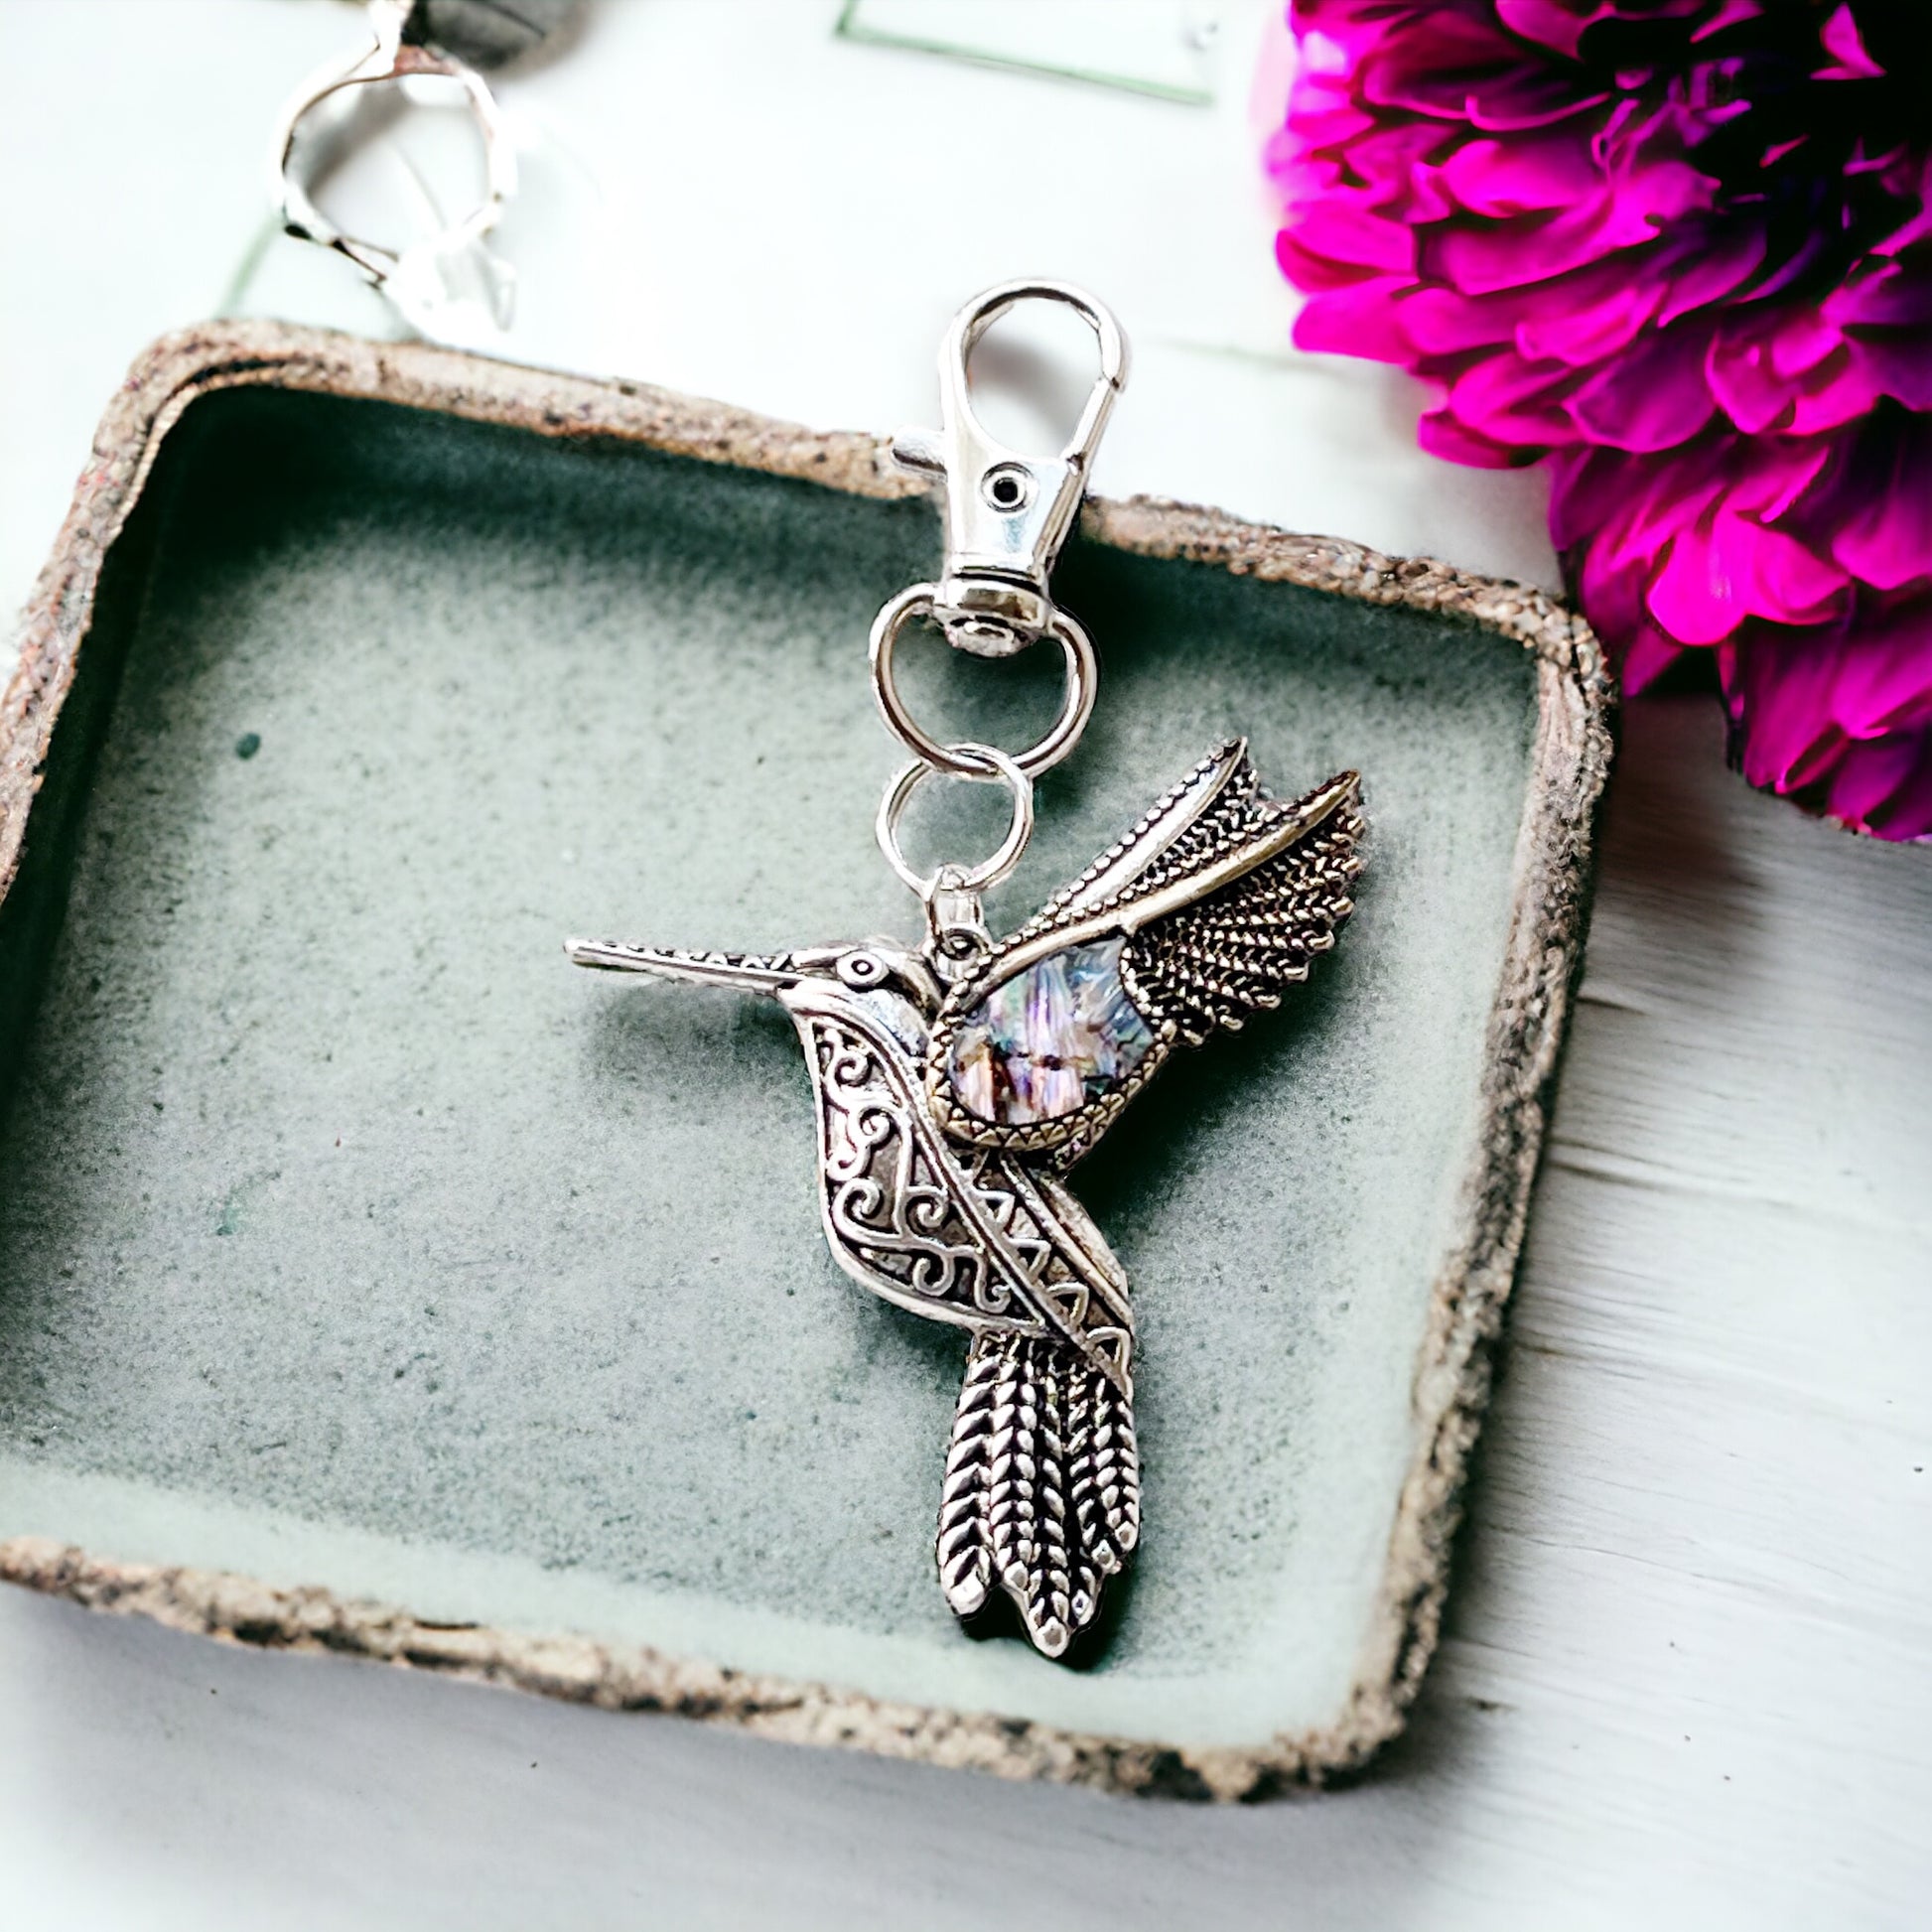 Silver Hummingbird Zipper Pull Keychain Purse Charm with Natural Abalone - Stylish Accessory